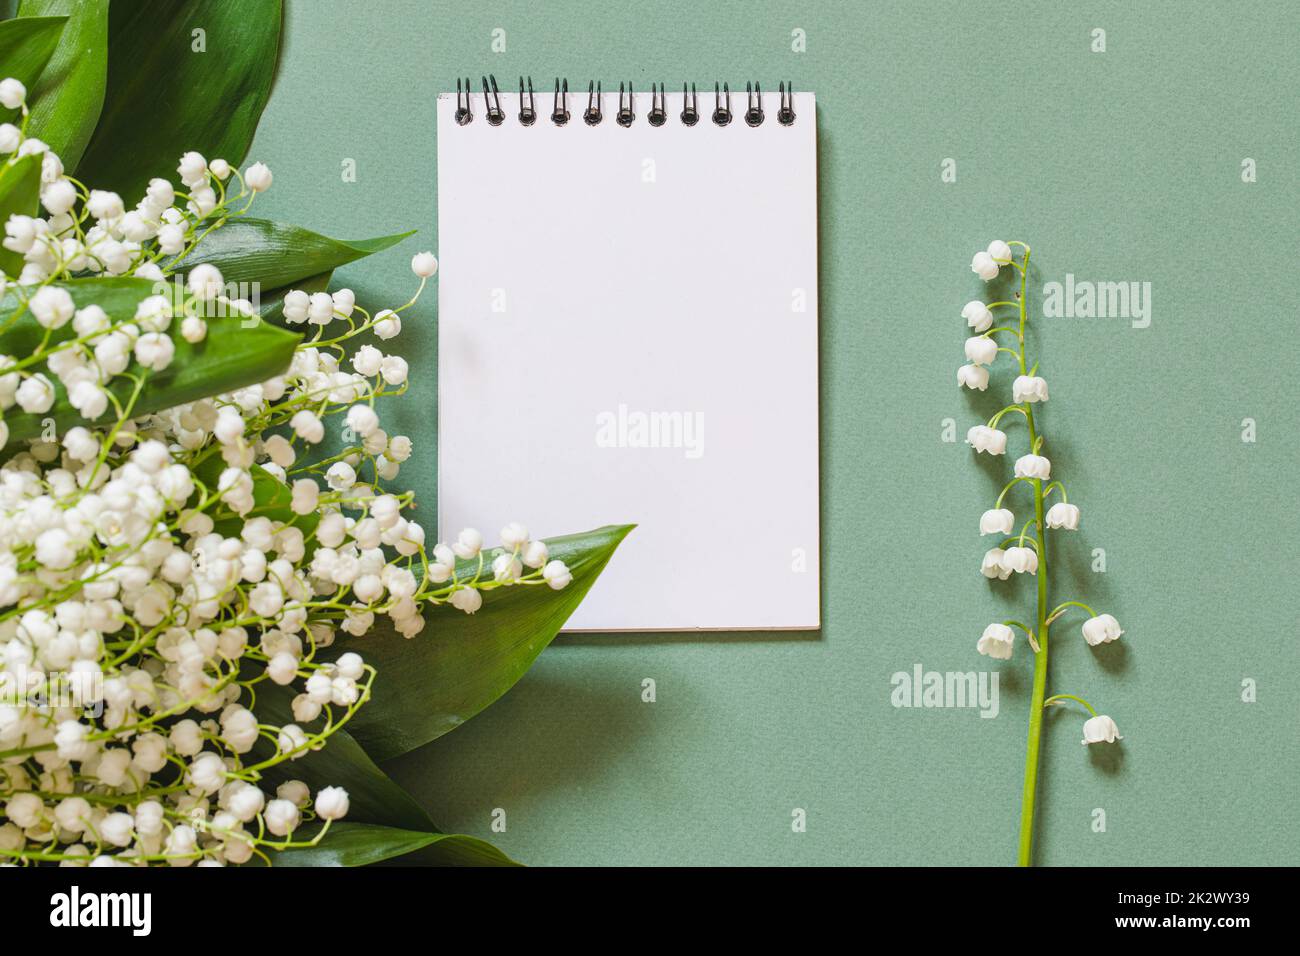 flowers and a blank sheet for writing what to do list or thanks. gratitude or planning concept Stock Photo